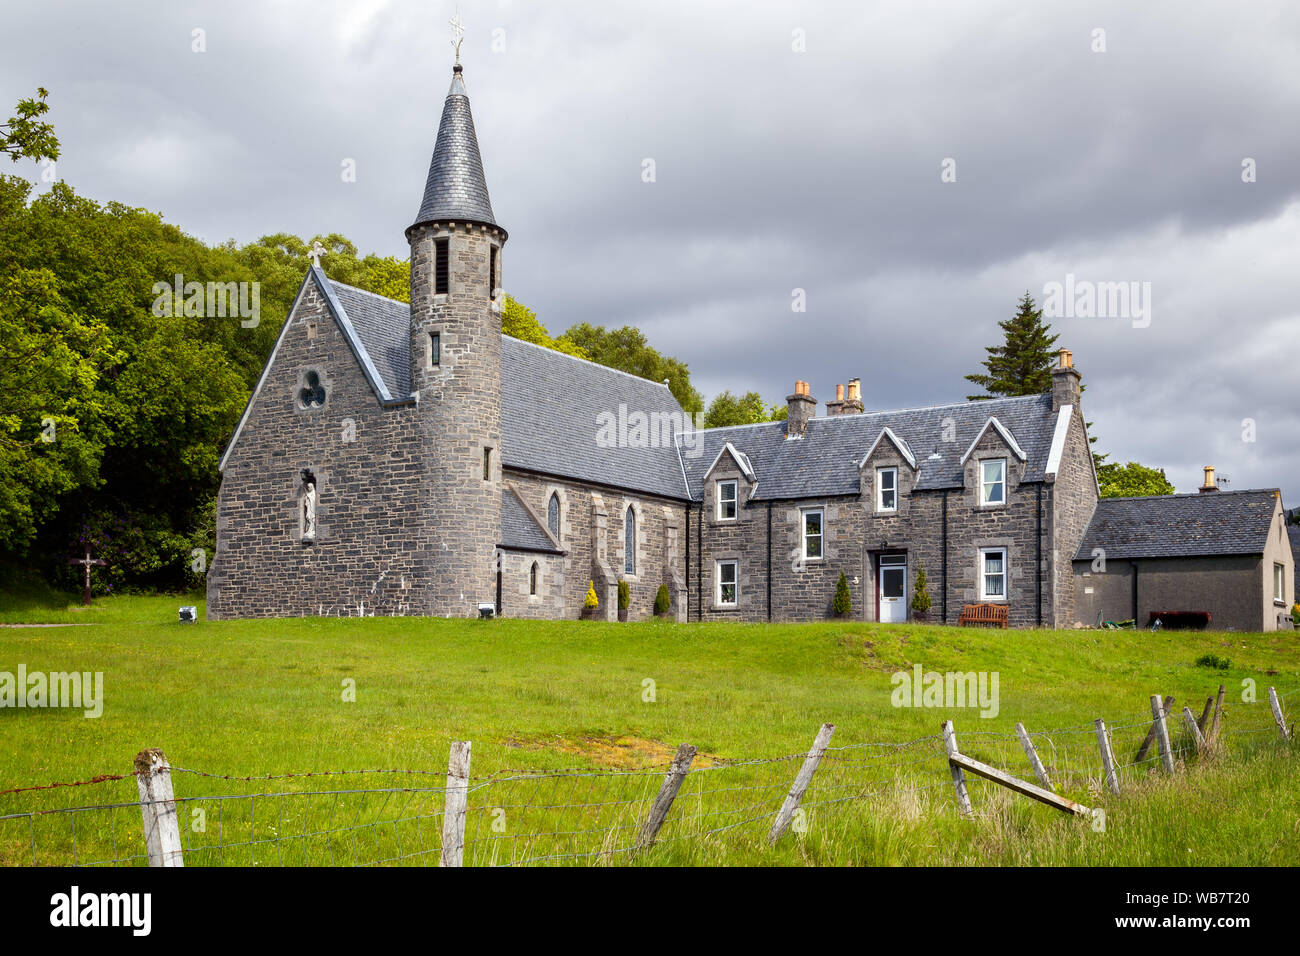 MORAR, SCOTTISH HIGHLANDS/UK - MAY 19 : Our Lady of Perpetual Succour & St Cumin's RC Church by Loch Morar in the West Highlands of Scotland on May 19, 2011 Stock Photo